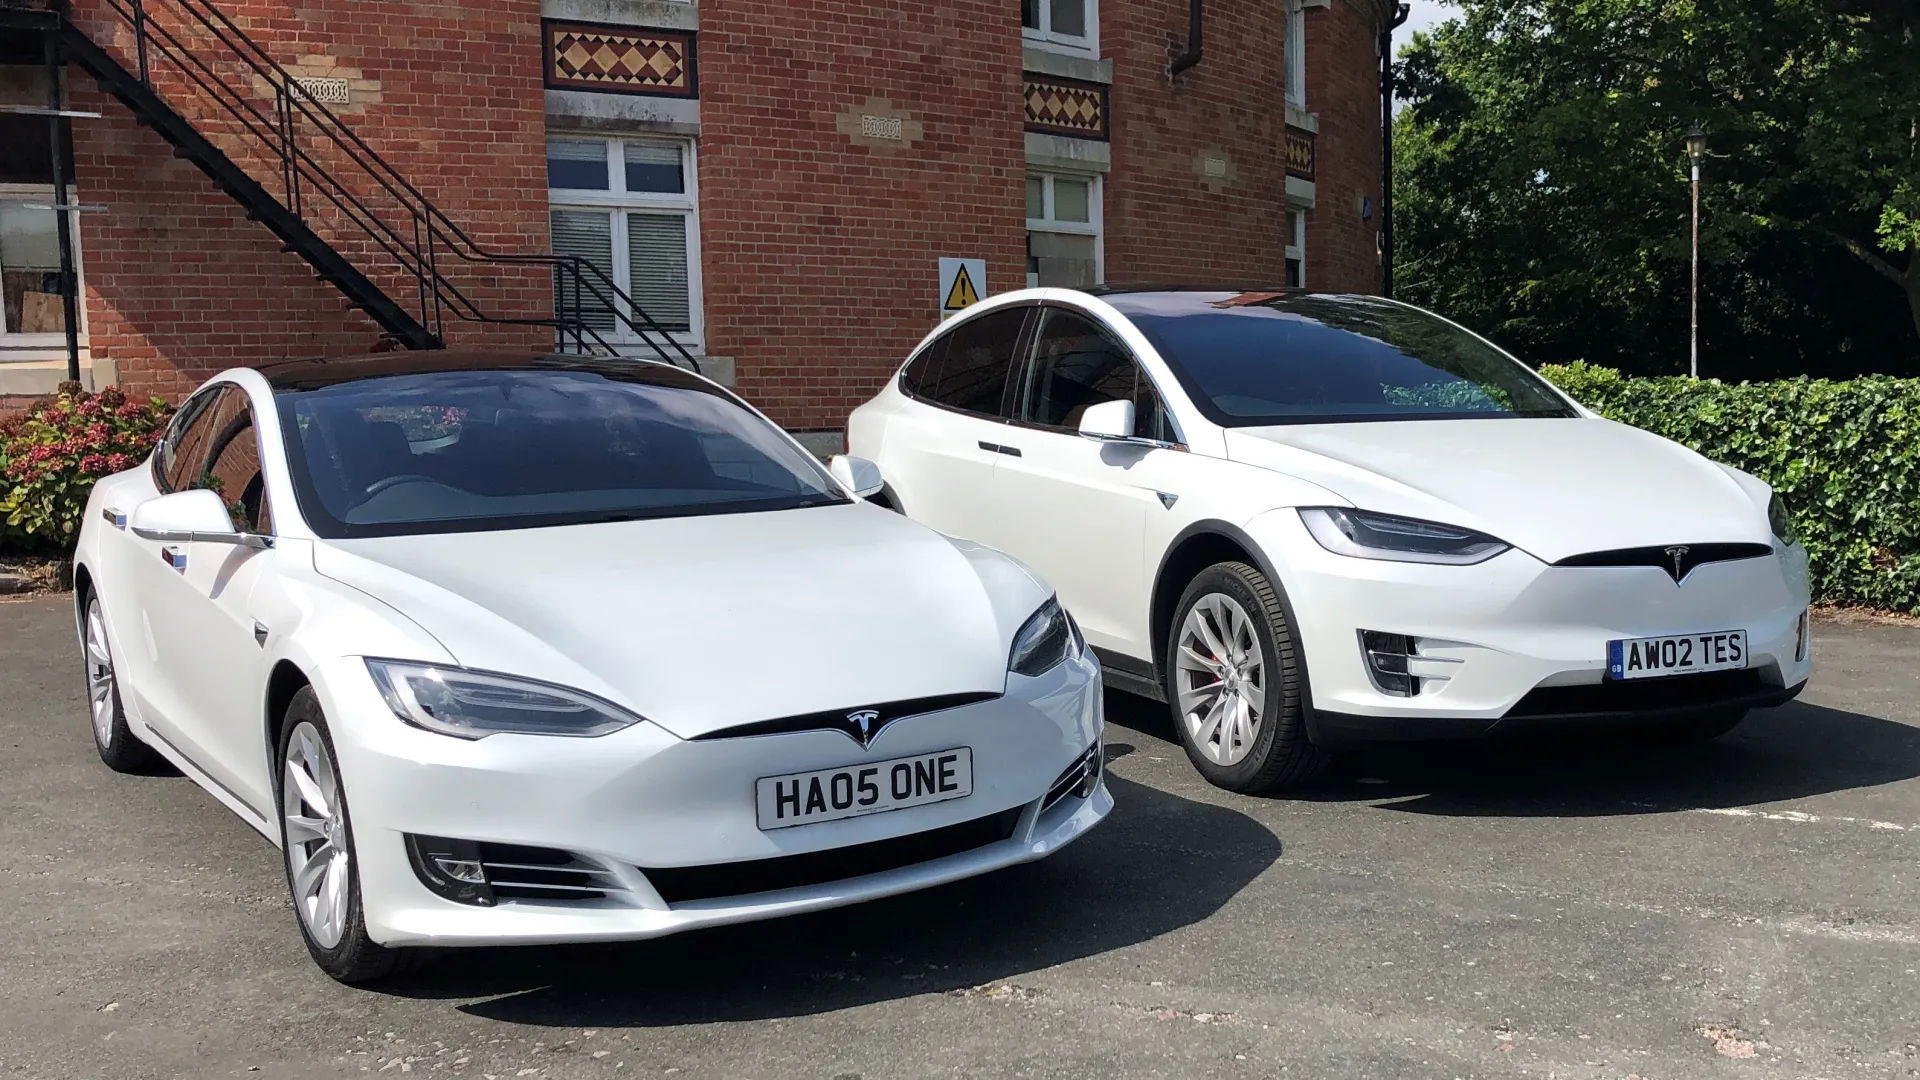 Pair of Tesla X and a Tesla S parked side by side.